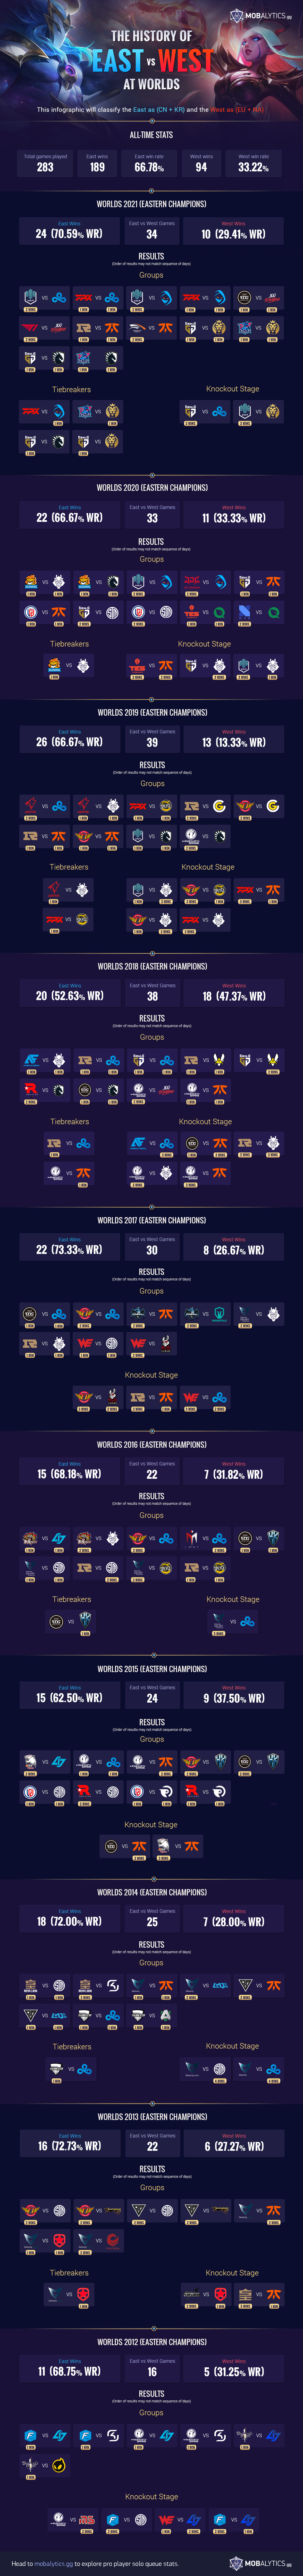 The History of East vs West at Worlds (All-Time Stats)